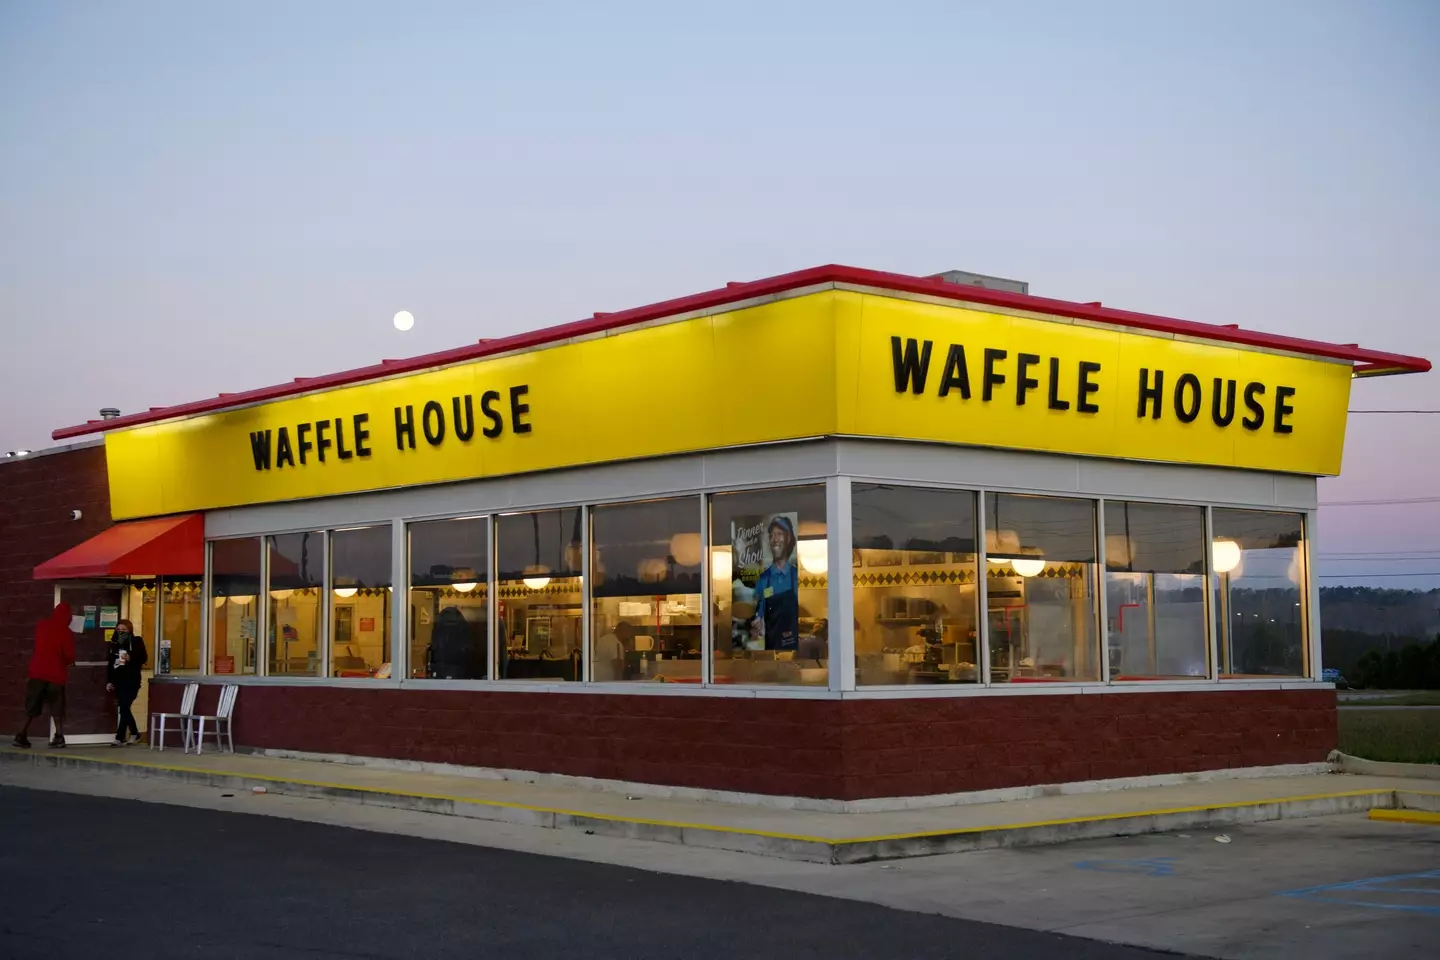 Like many of its competitors, Waffle House has a service charge.